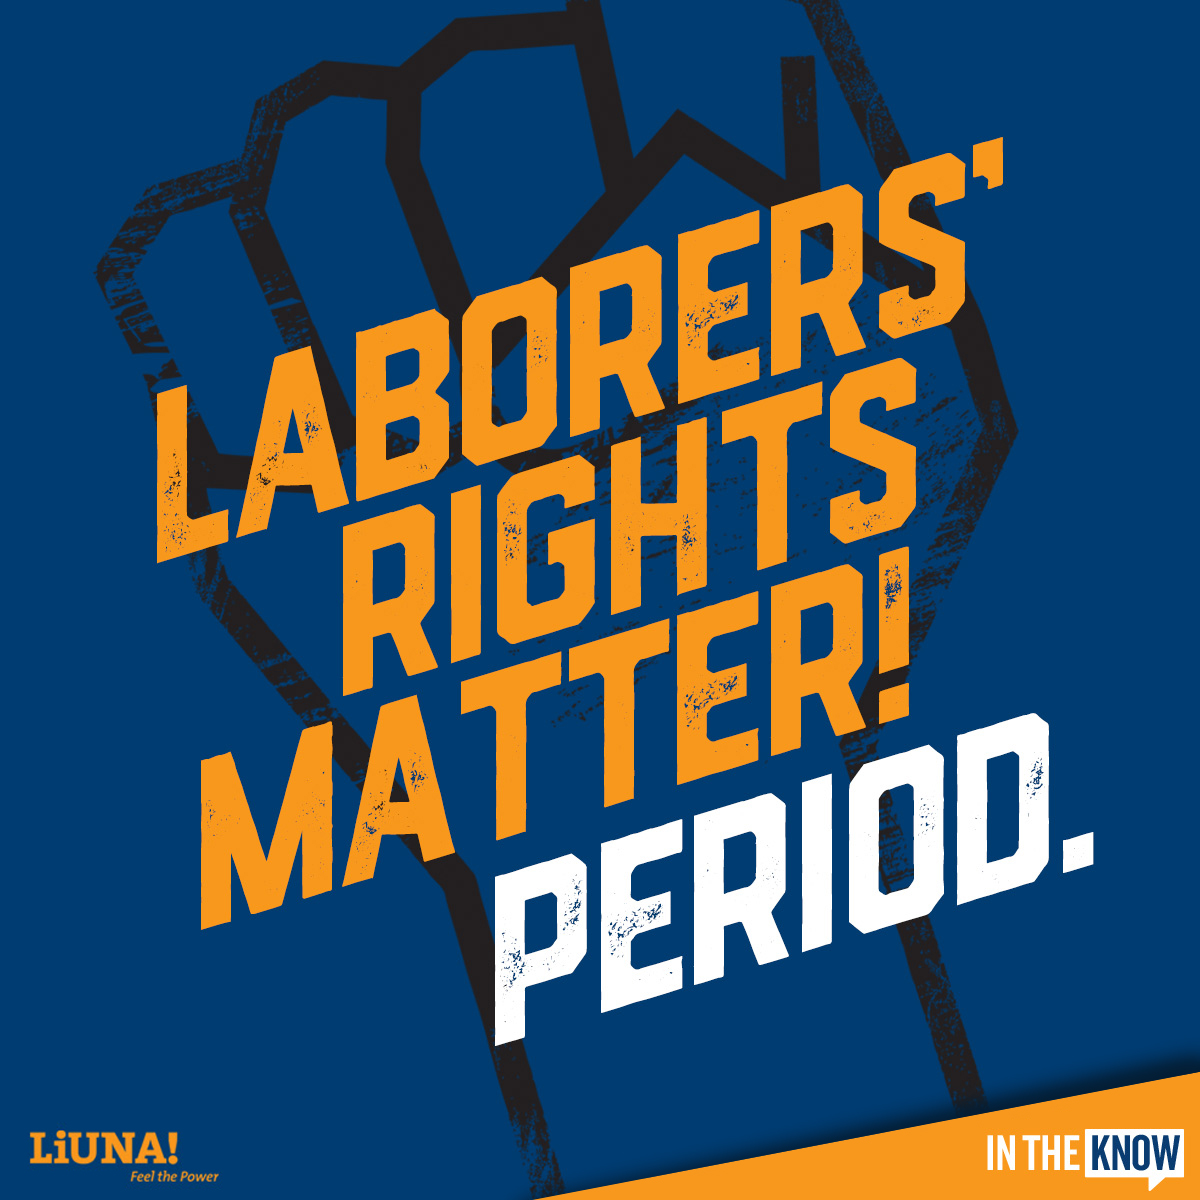 Our members deserve more than just a job—they deserve rights that protect their well-being & livelihoods. LIUNA fights for fair treatment & a strong voice in the workplace. 

#Solidarity #UnionStrong #WorkersRights #CollectiveBargaining #LaborersRising #ITK #LIUNA #FeelThePower